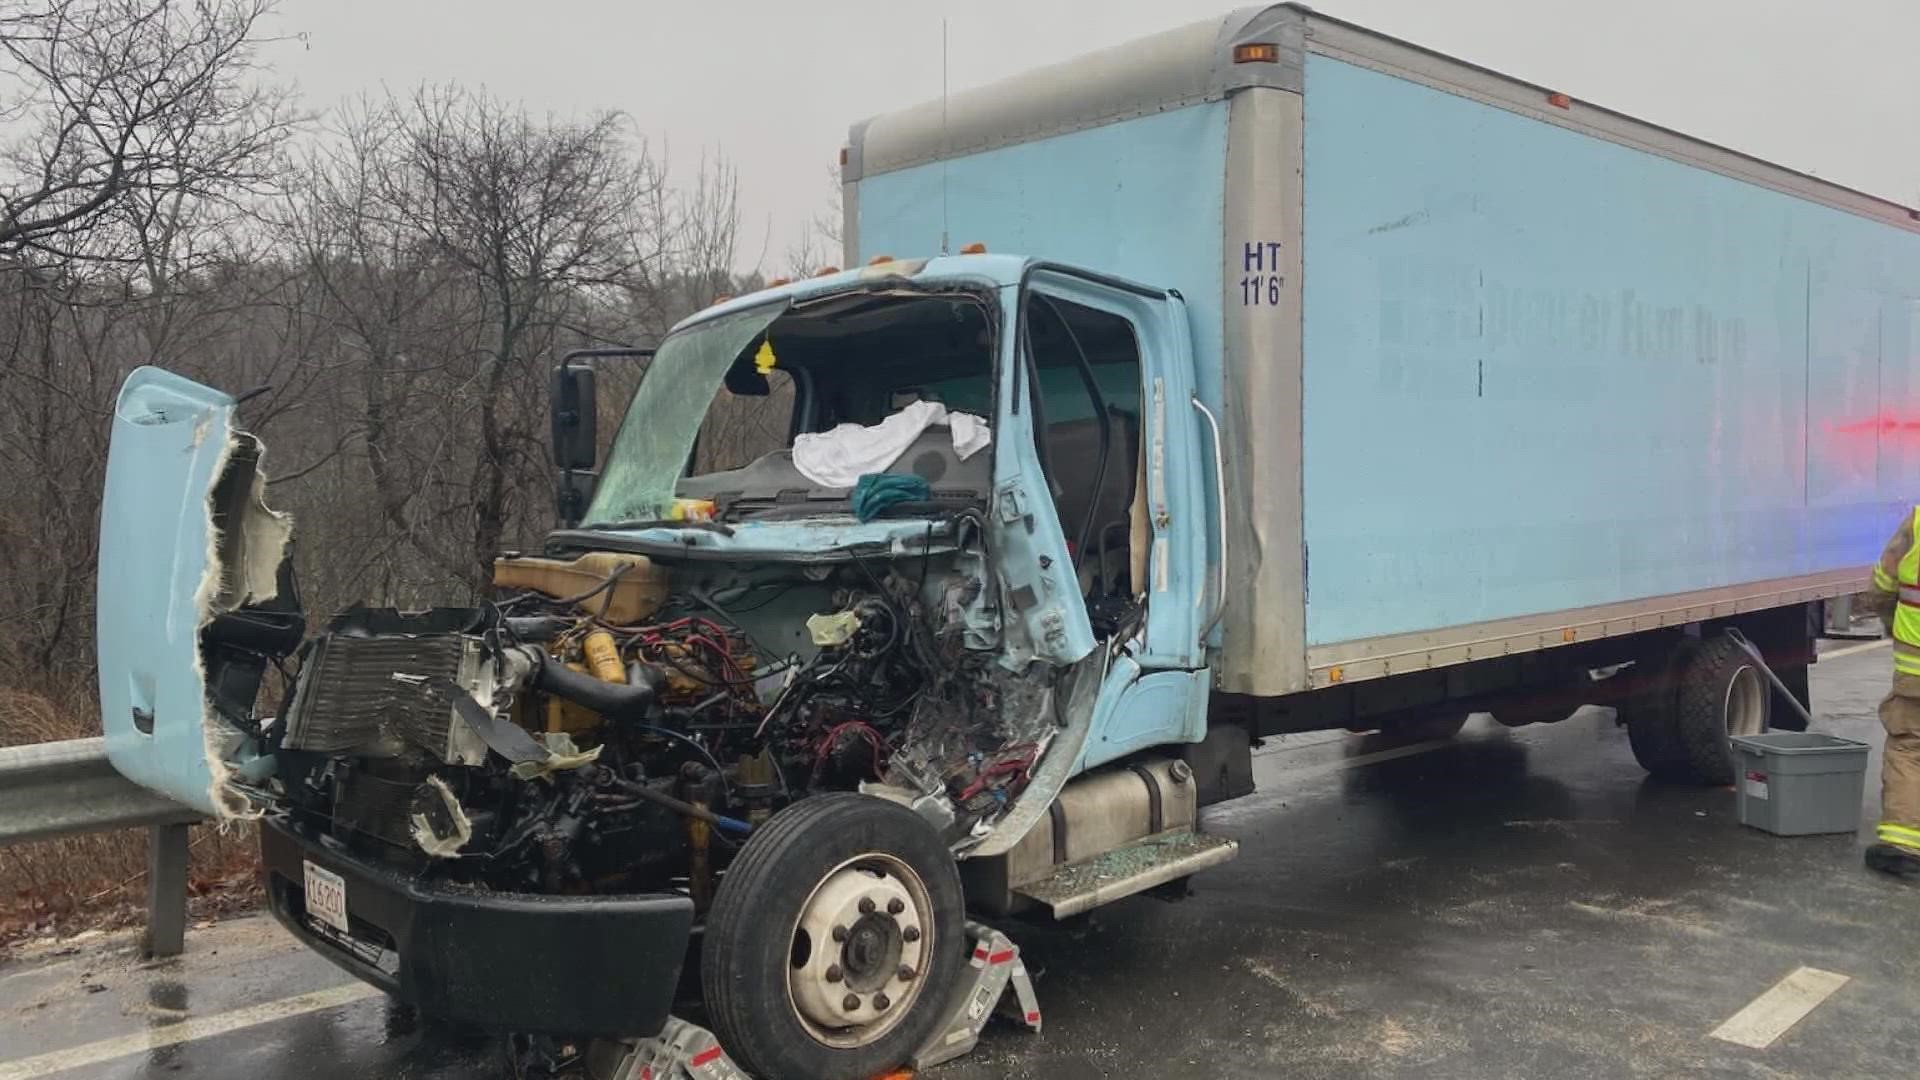 The box truck driver had to be extricated from the vehicle and suffered severe injuries that are not considered life-threatening, a release said Thursday.